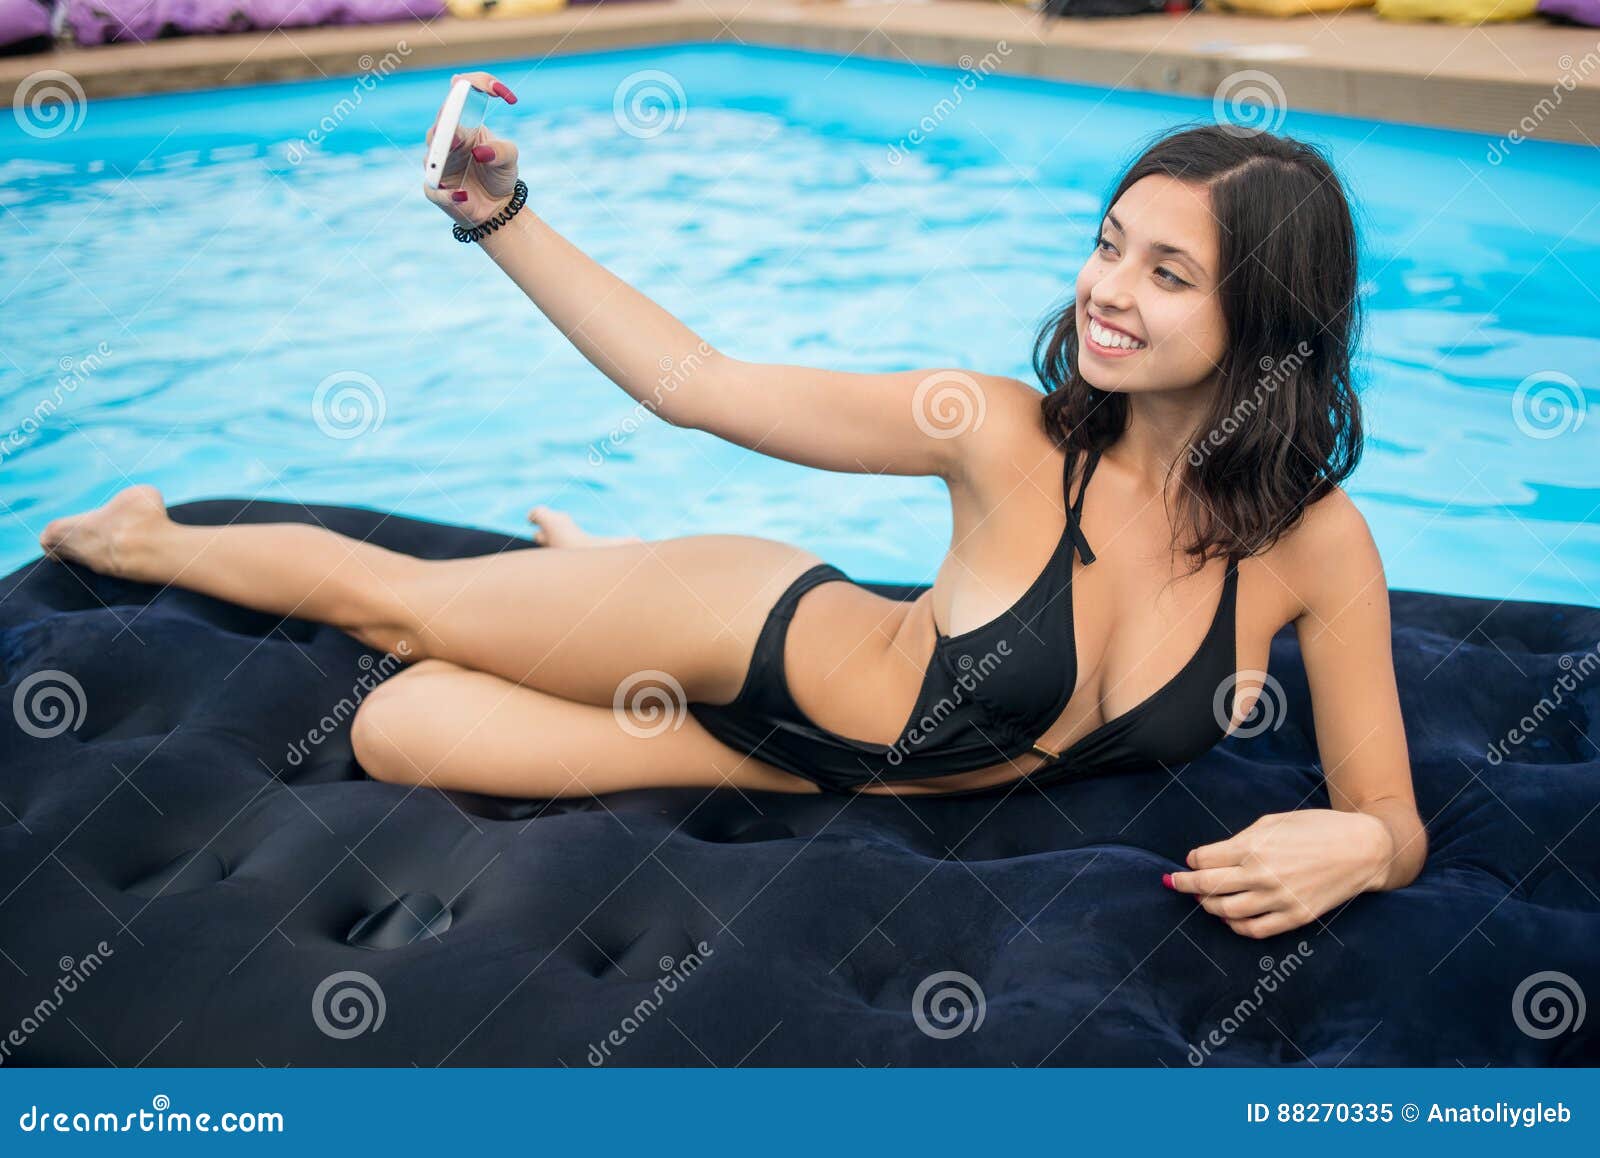 Attractive Woman in Bikini Smiling and Taking Selfie Photo on the Phone on  a Mattress in the Pool at the Resort Stock Image - Image of brunette,  female: 88270335